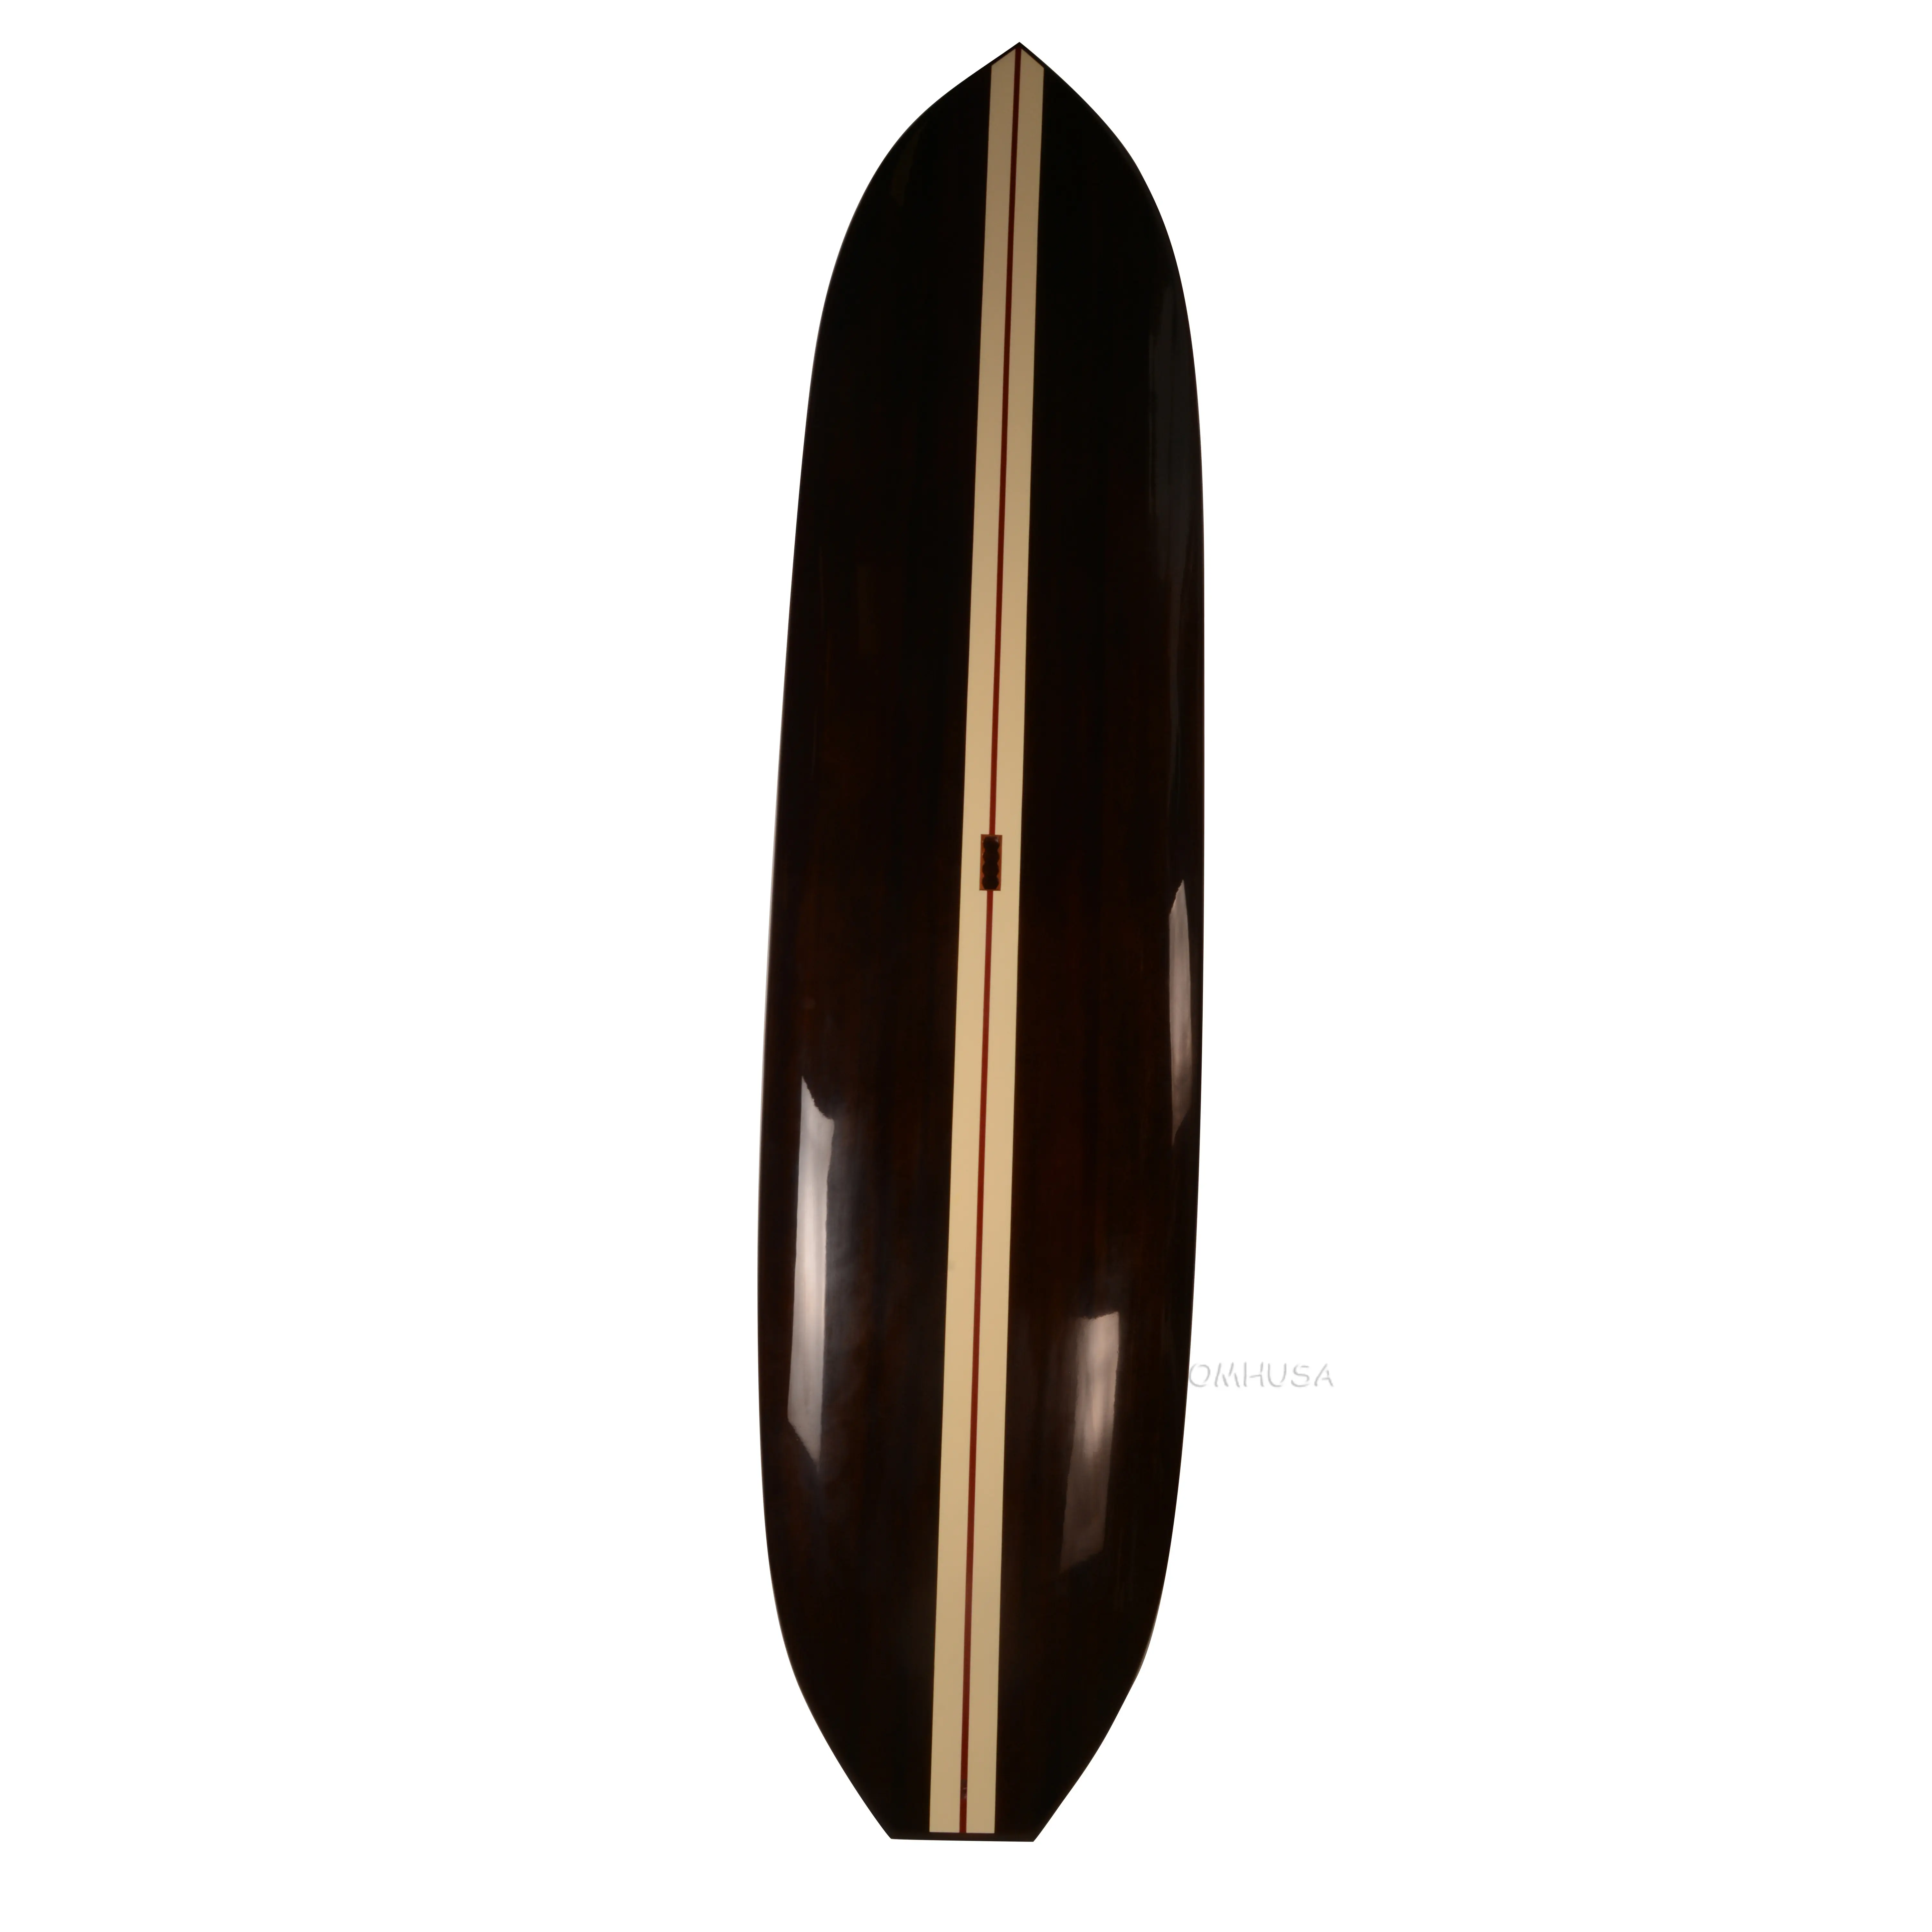 K222B Paddle Board in Dark Painted Wood 11ft with 1 fin K222B-PADDLE-BOARD-IN-DARK-PAINTED-WOOD-11FT-WITH-1-FIN-L01.WEBP